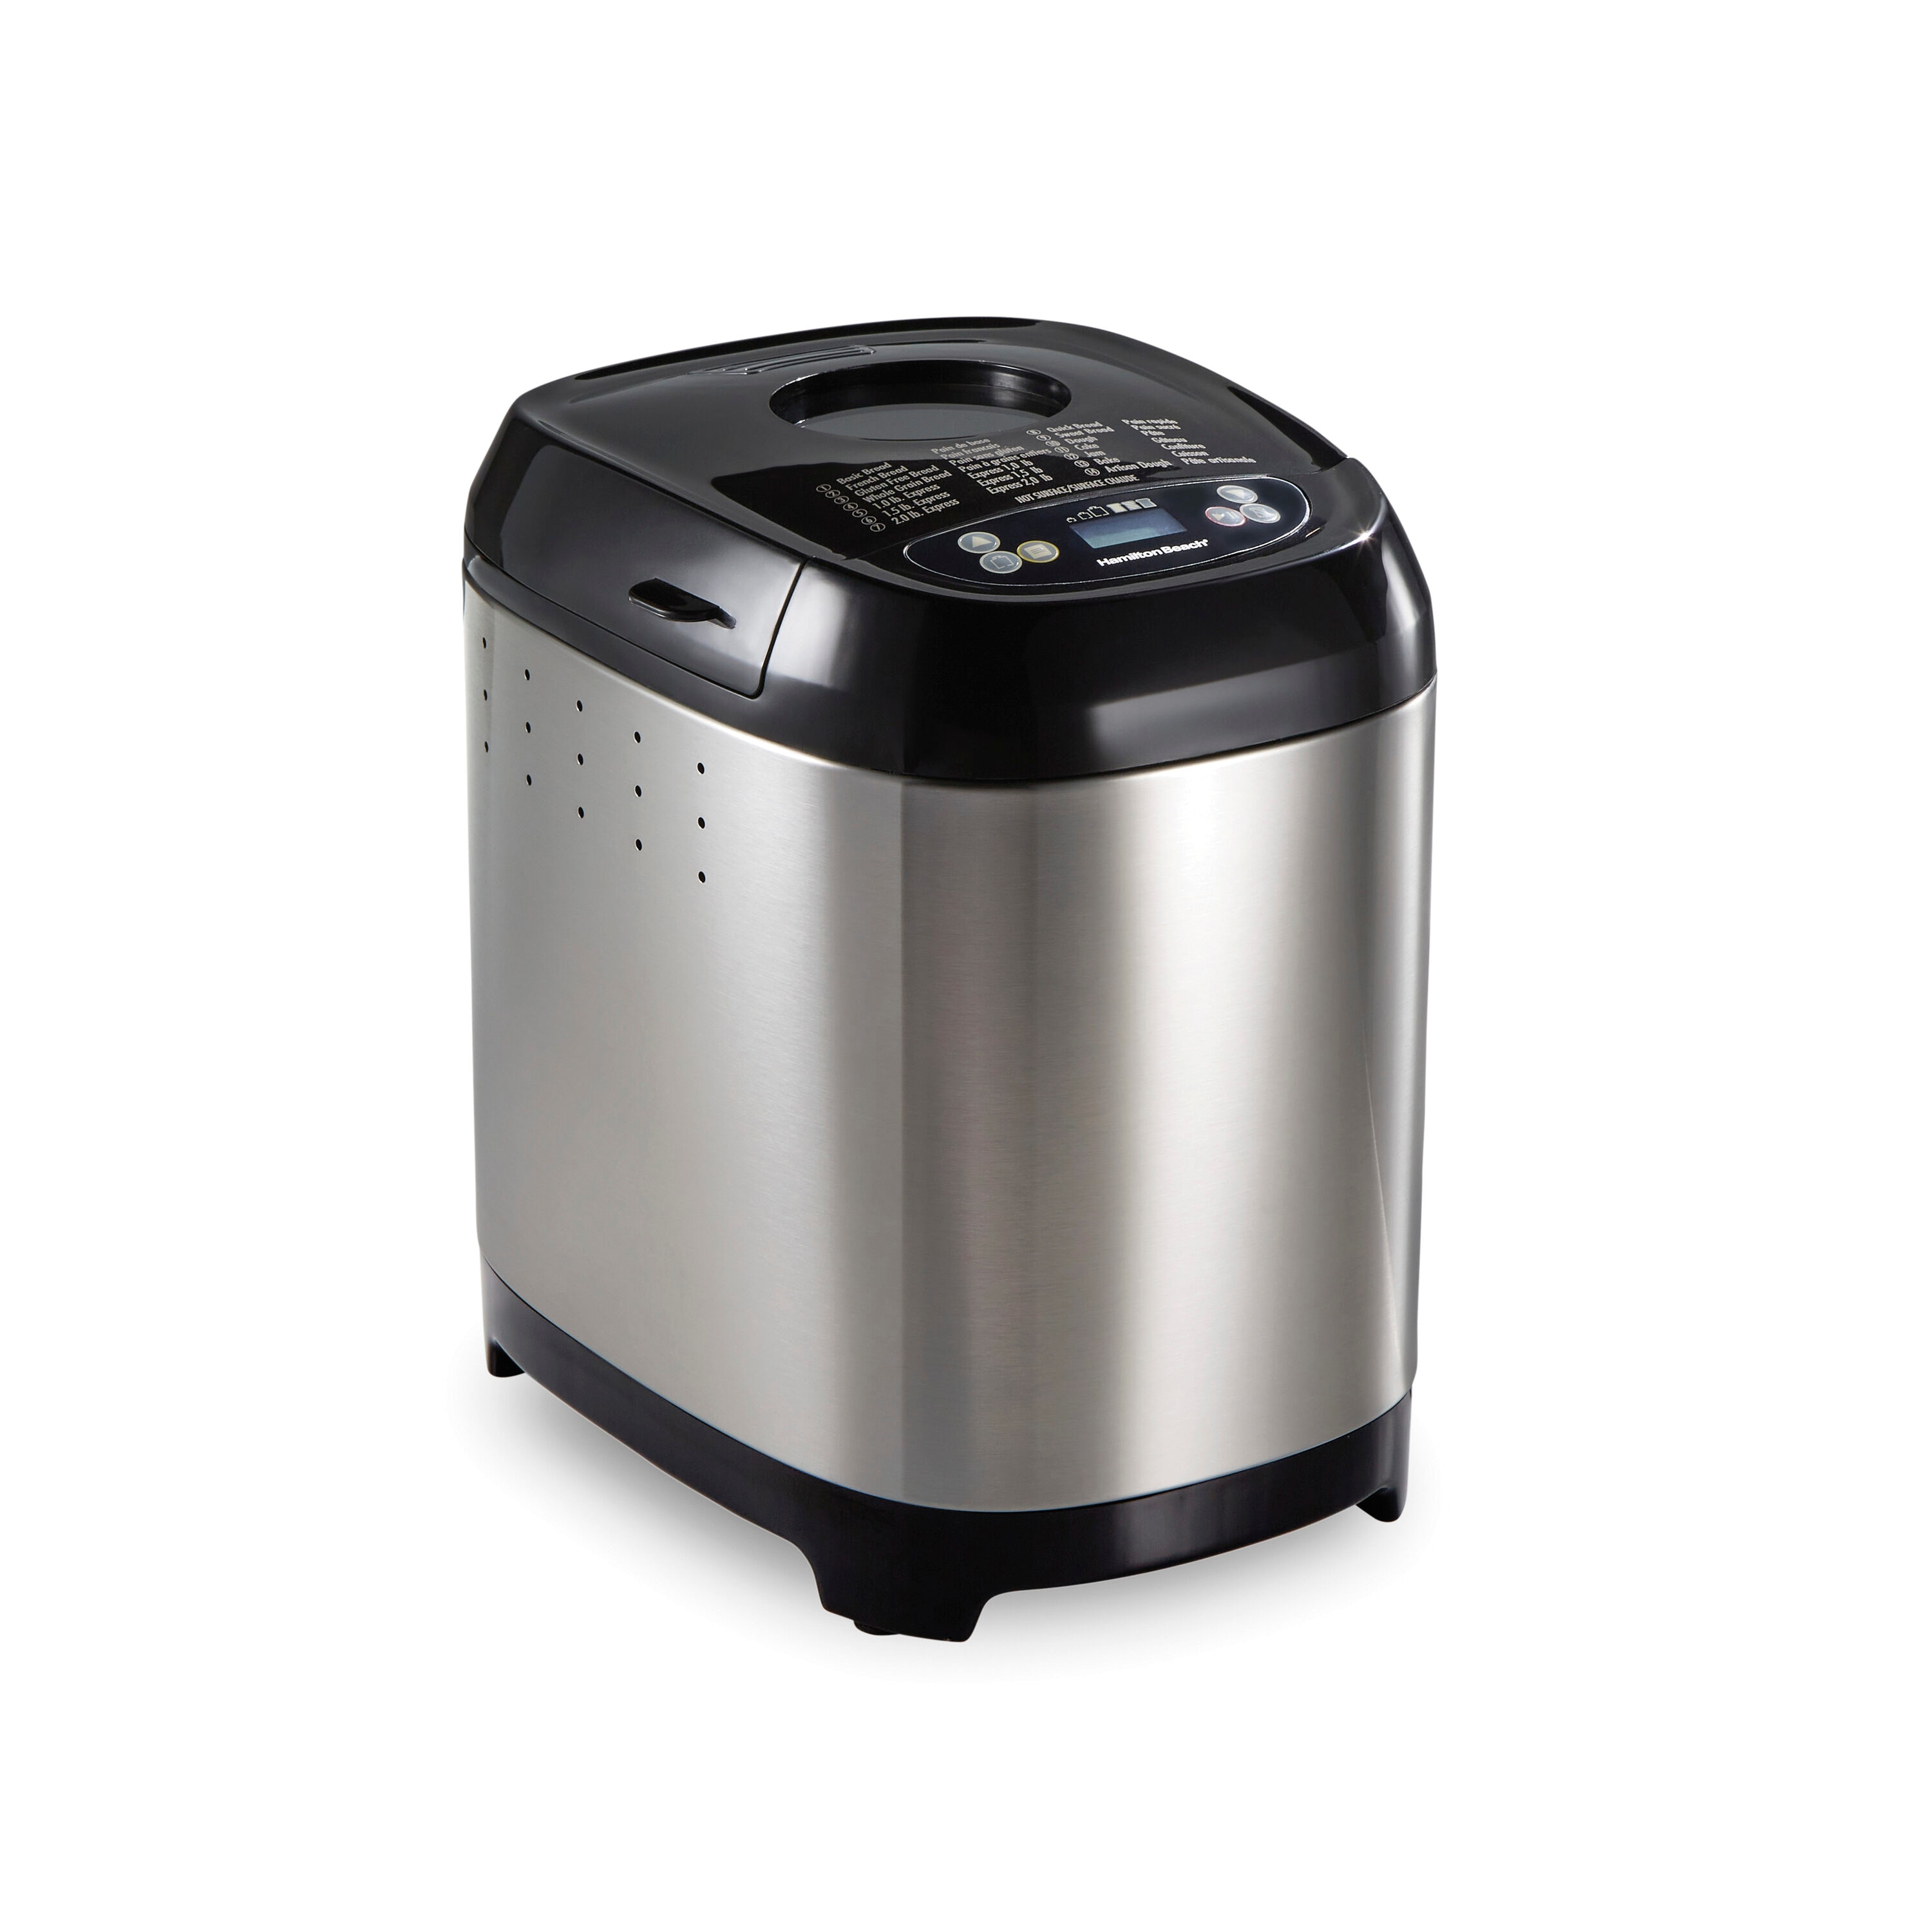 Courant 2 lbs. Automatic Bread Maker Stainless Steel, Silver